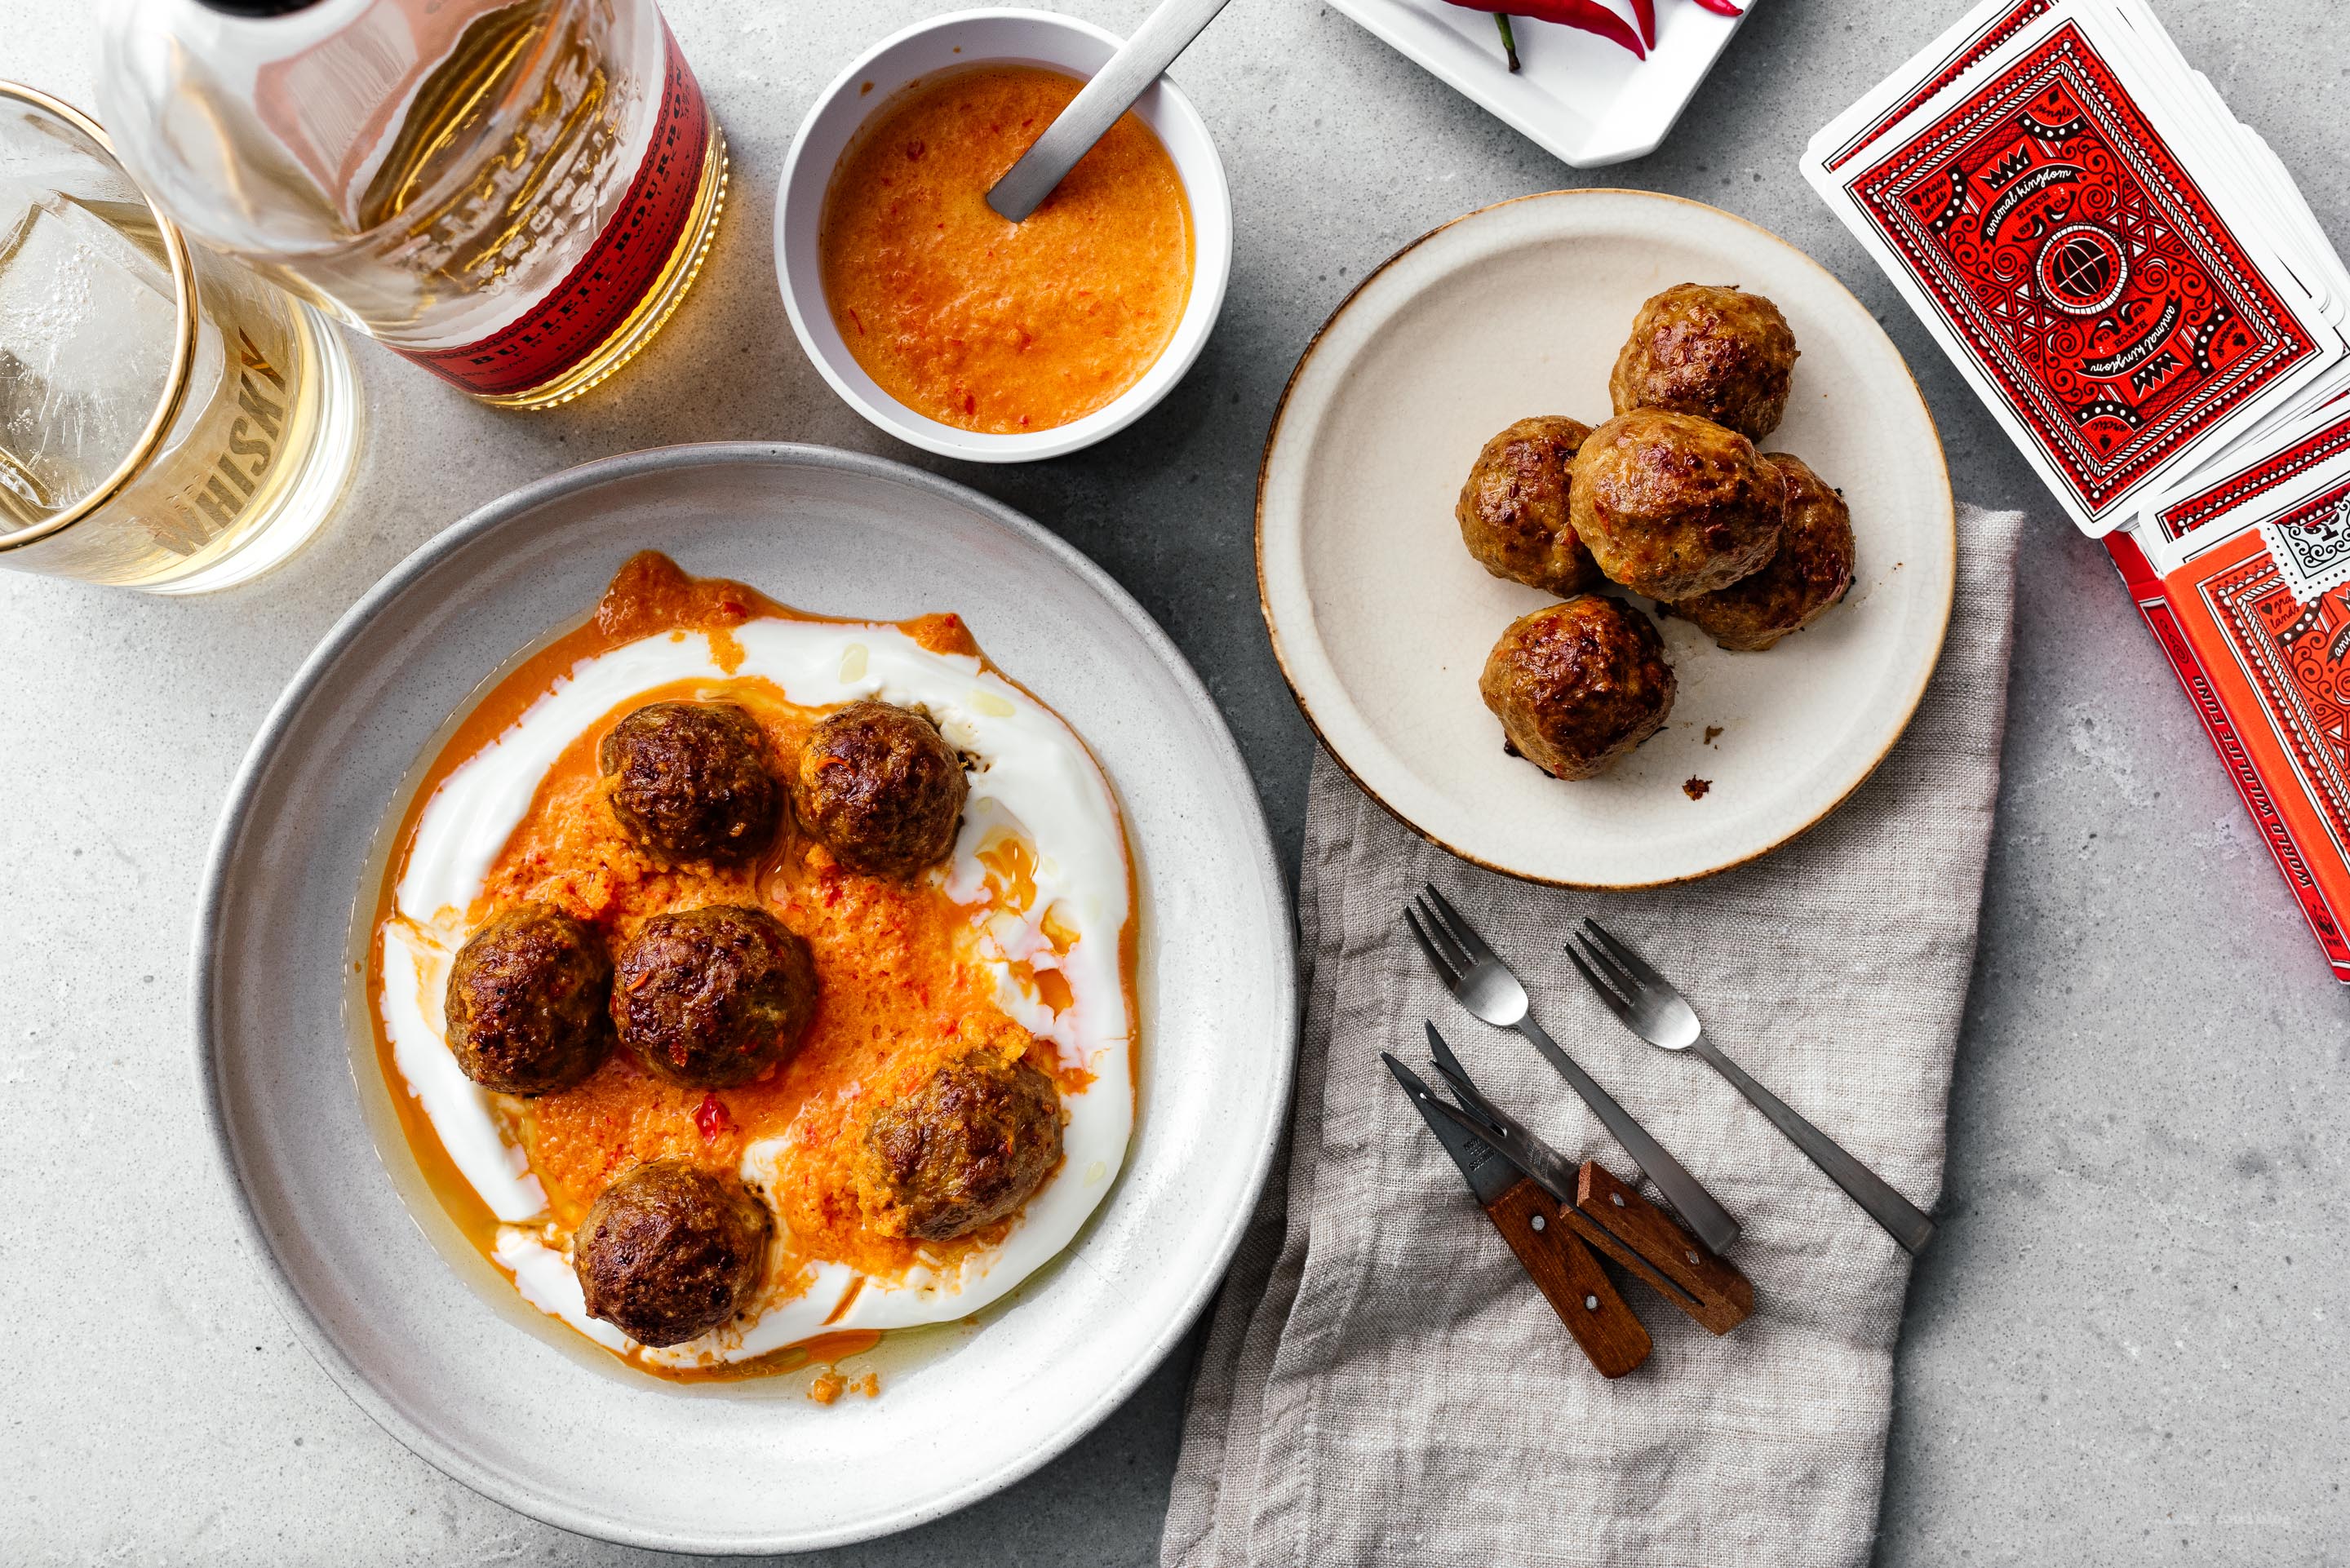 Make these Weeknight Piri Piri Pork Meatballs and Spice Up Your Dinner